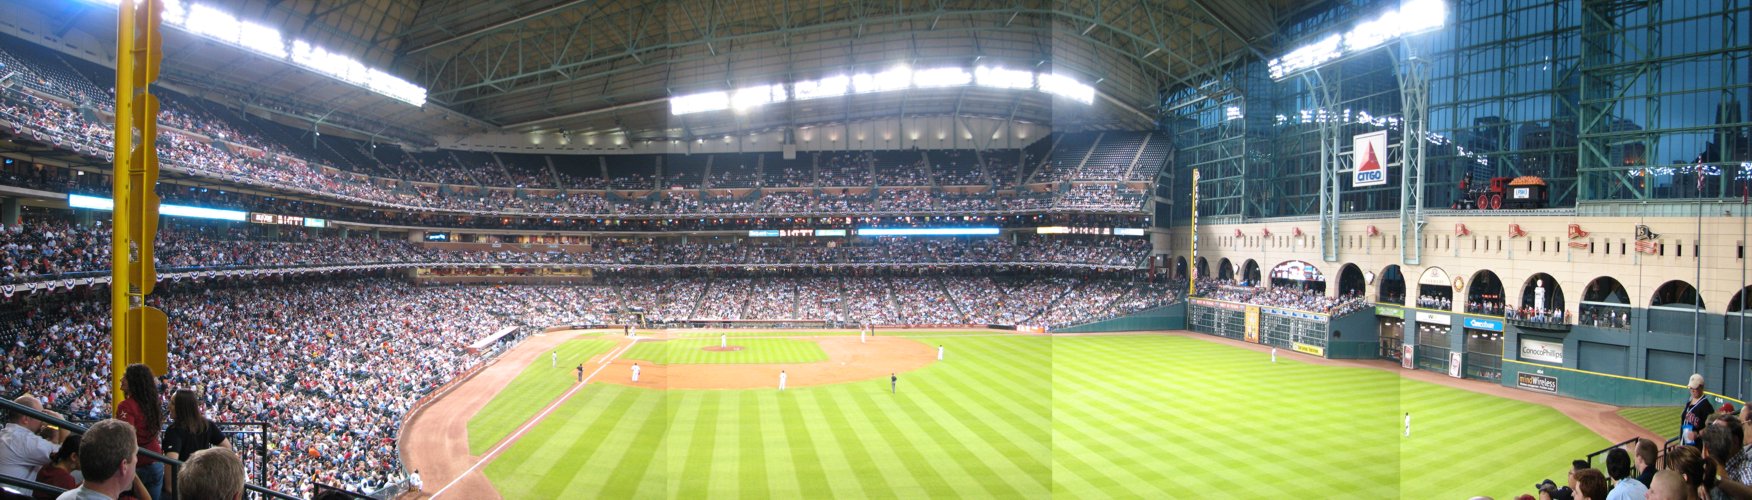 Minute Maid Park Panorama: Closed Roof